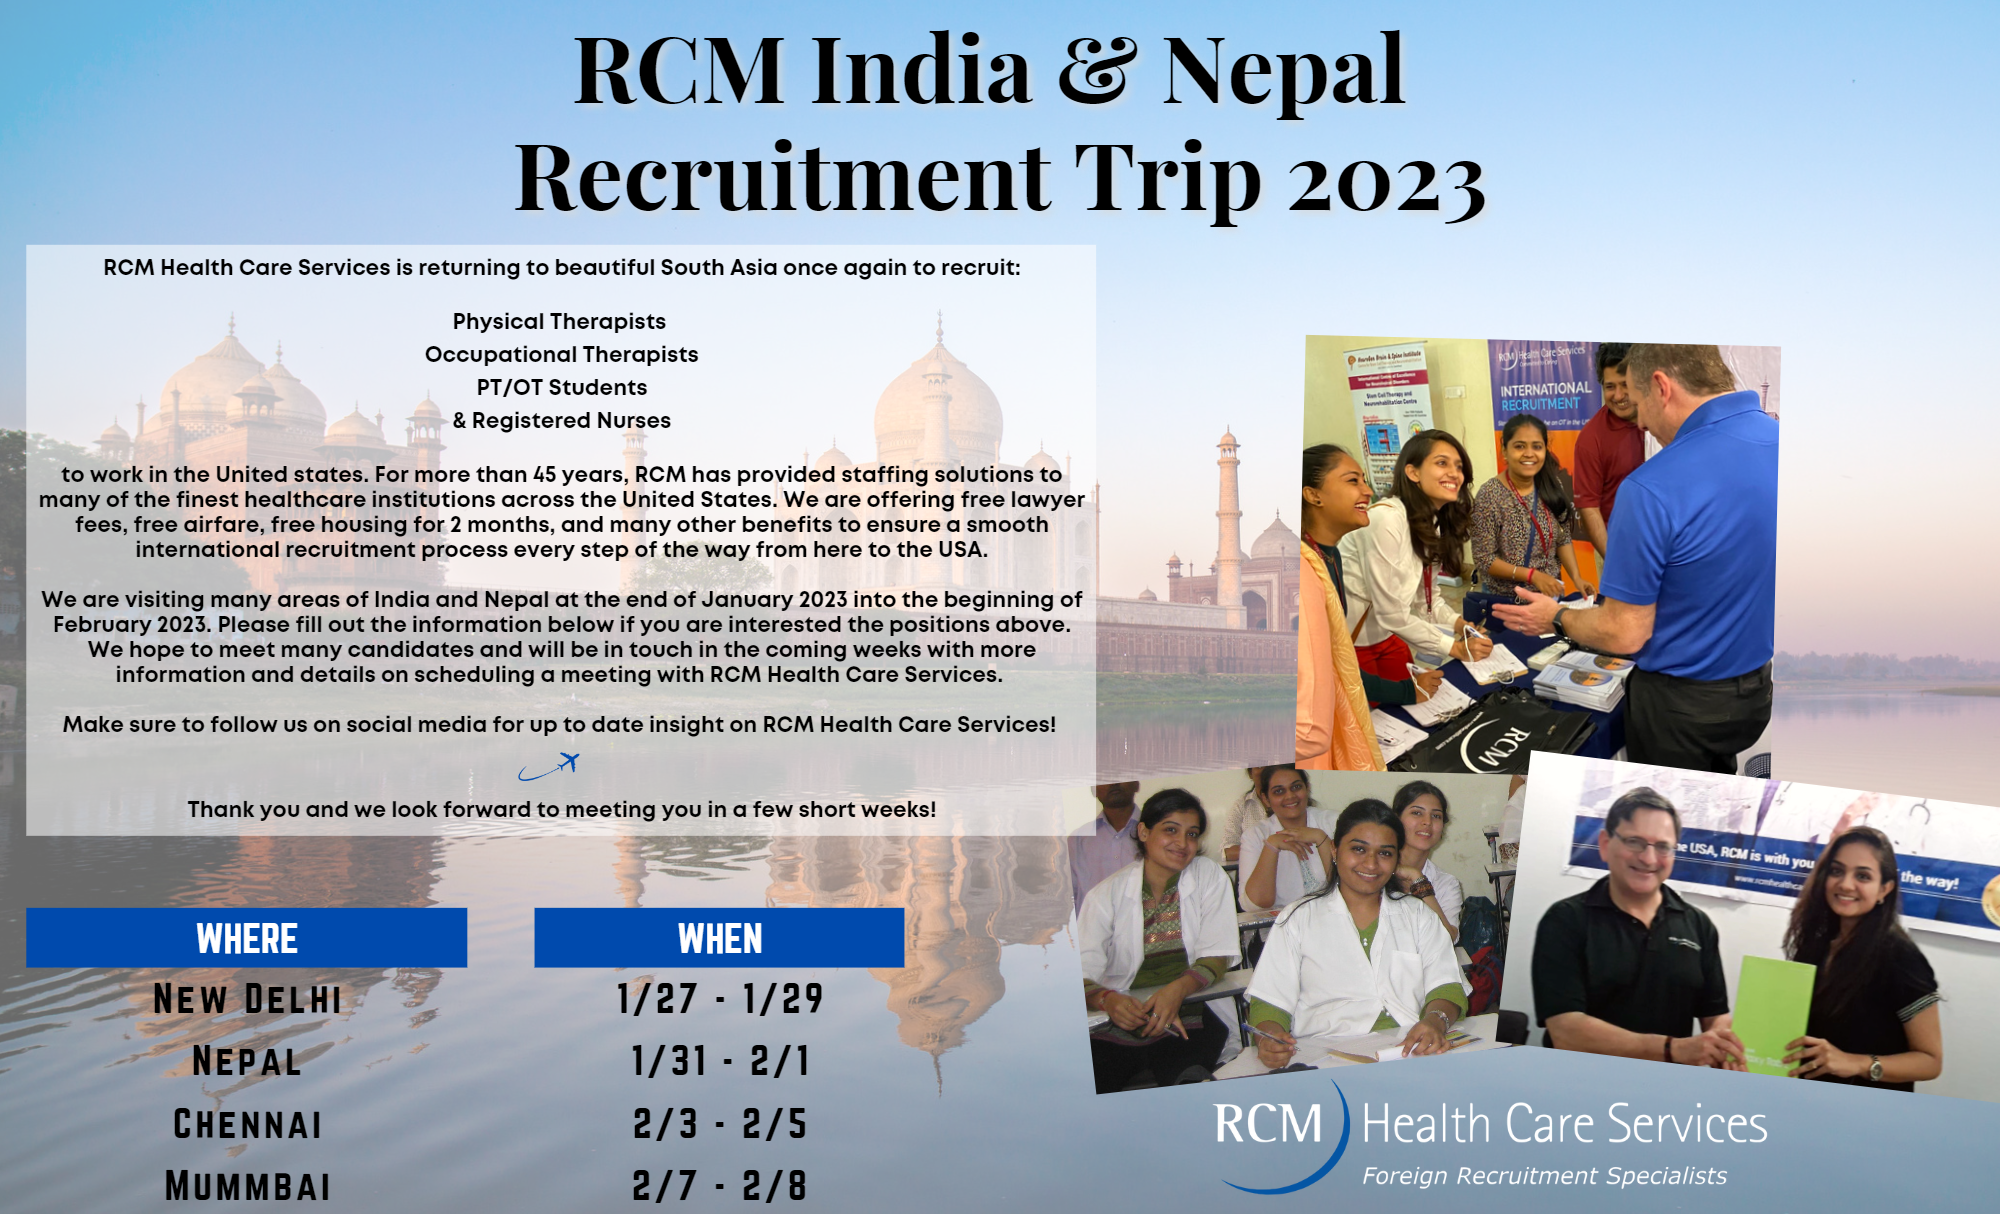 RCM Health Care Services is returning to beautiful South Asia once again to recruit: Physical Therapists Occupational Therapists PT/OT Students & Registered Nurses to work in the United states. For more than 45 years, RCM has provided staffing solutions to many of the finest healthcare institutions across the United States. We are offering free lawyer fees, free airfare, free housing for 2 months, and many other benefits to ensure a smooth international recruitment process every step of the way from here to the USA. We are visiting many areas of India and Nepal at the end of January 2023 into the beginning of February 2023. Please fill out the information below if you are interested the positions above. We hope to meet many candidates and will be in touch in the coming weeks with more information and details on scheduling a meeting with RCM Health Care Services. Make sure to follow us on social media for up to date insight on RCM Health Care Services! Thank you and we look forward to meeting you in a few short weeks!